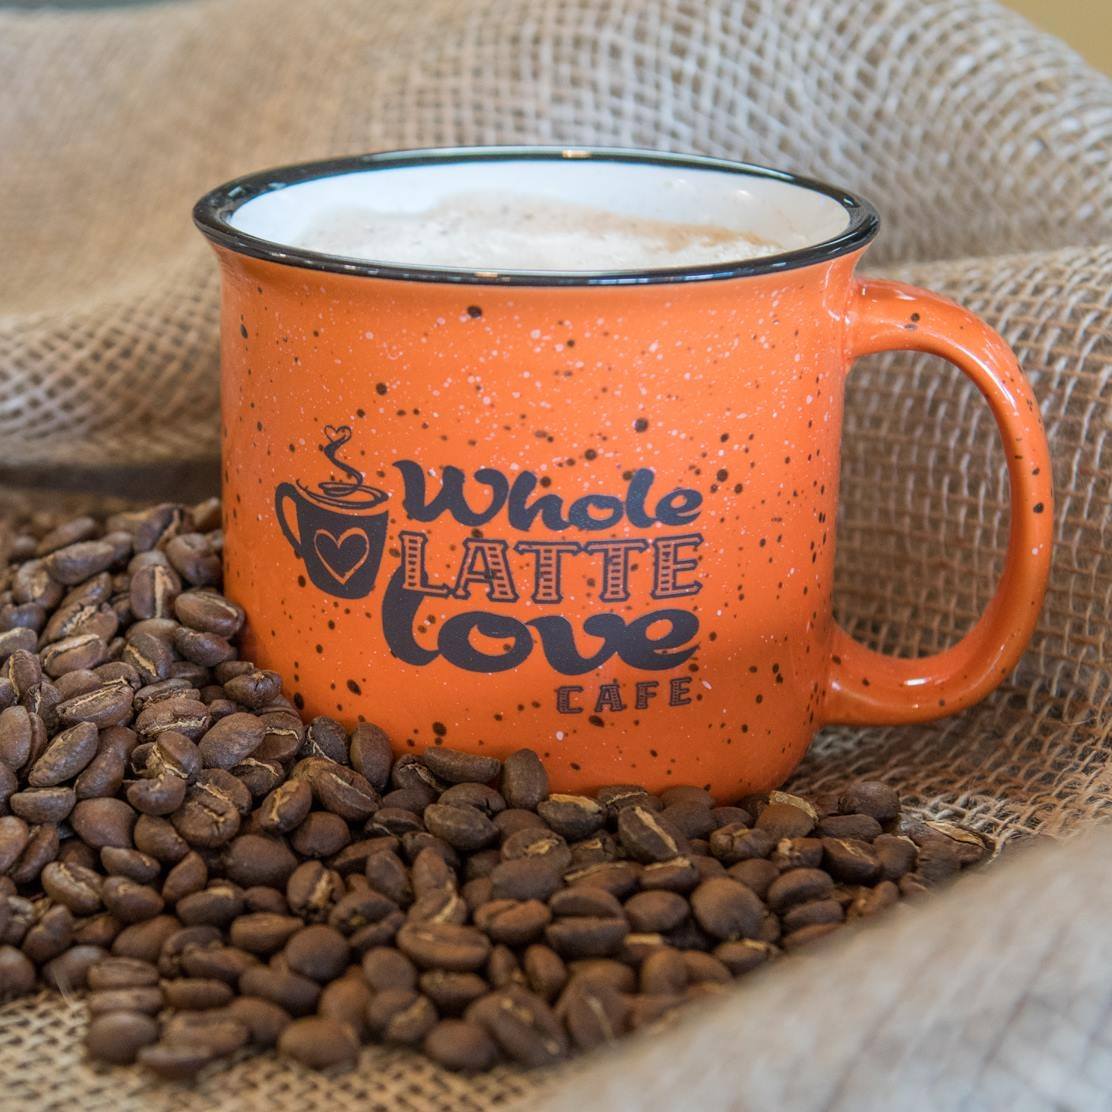 a mug with the Whole Latte Love logo on it